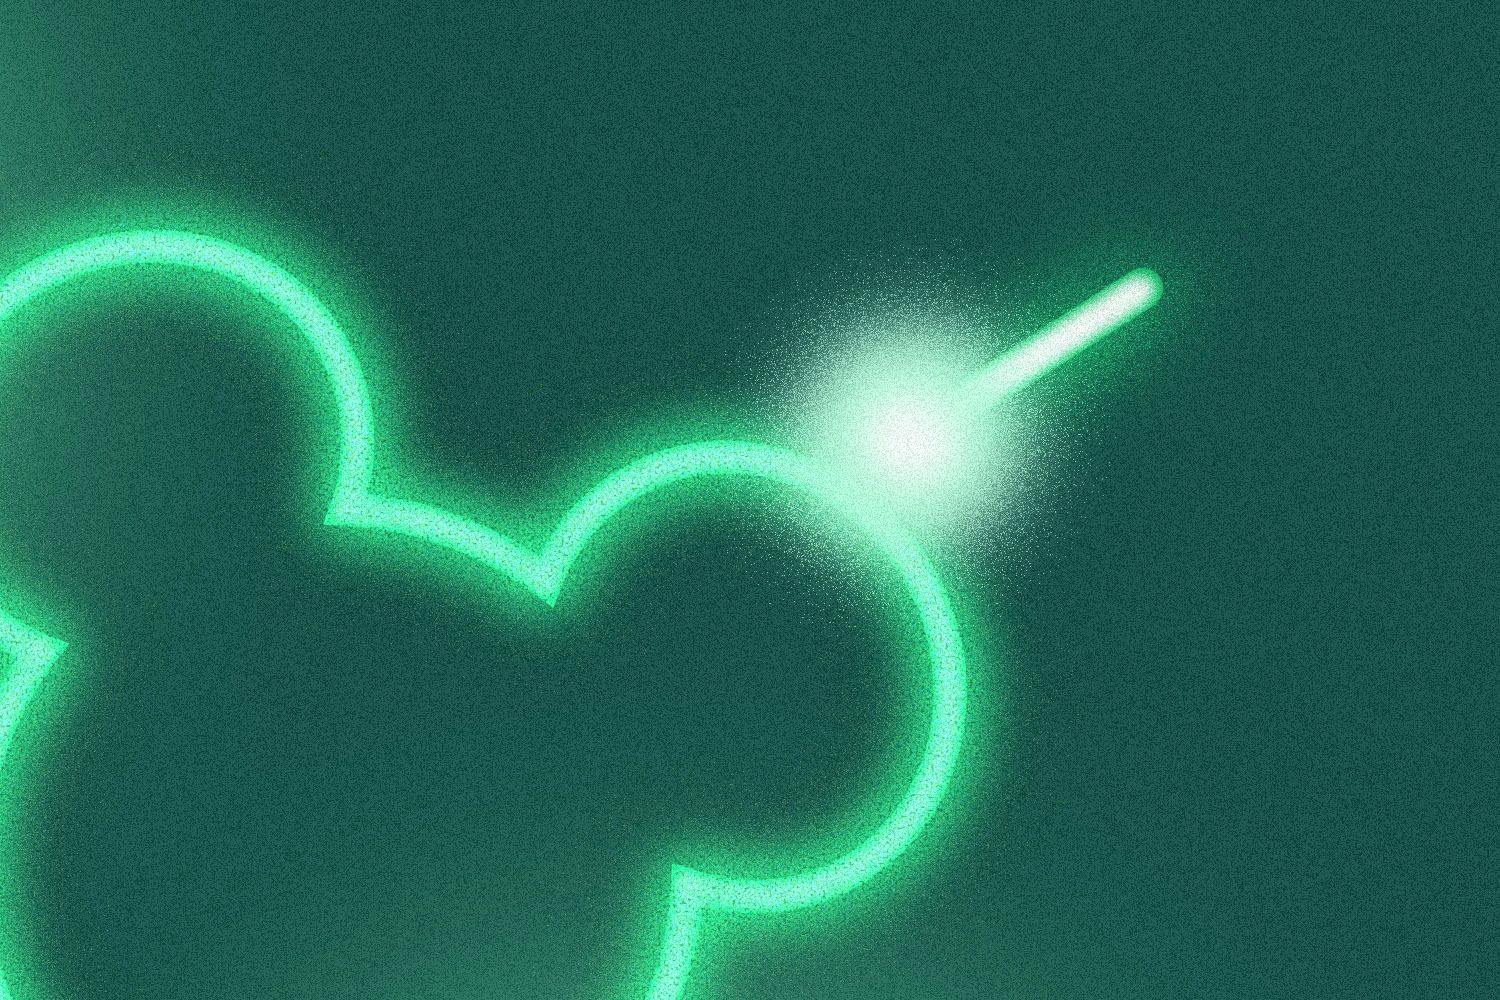 Mouse ears being drawn with glowing wand.